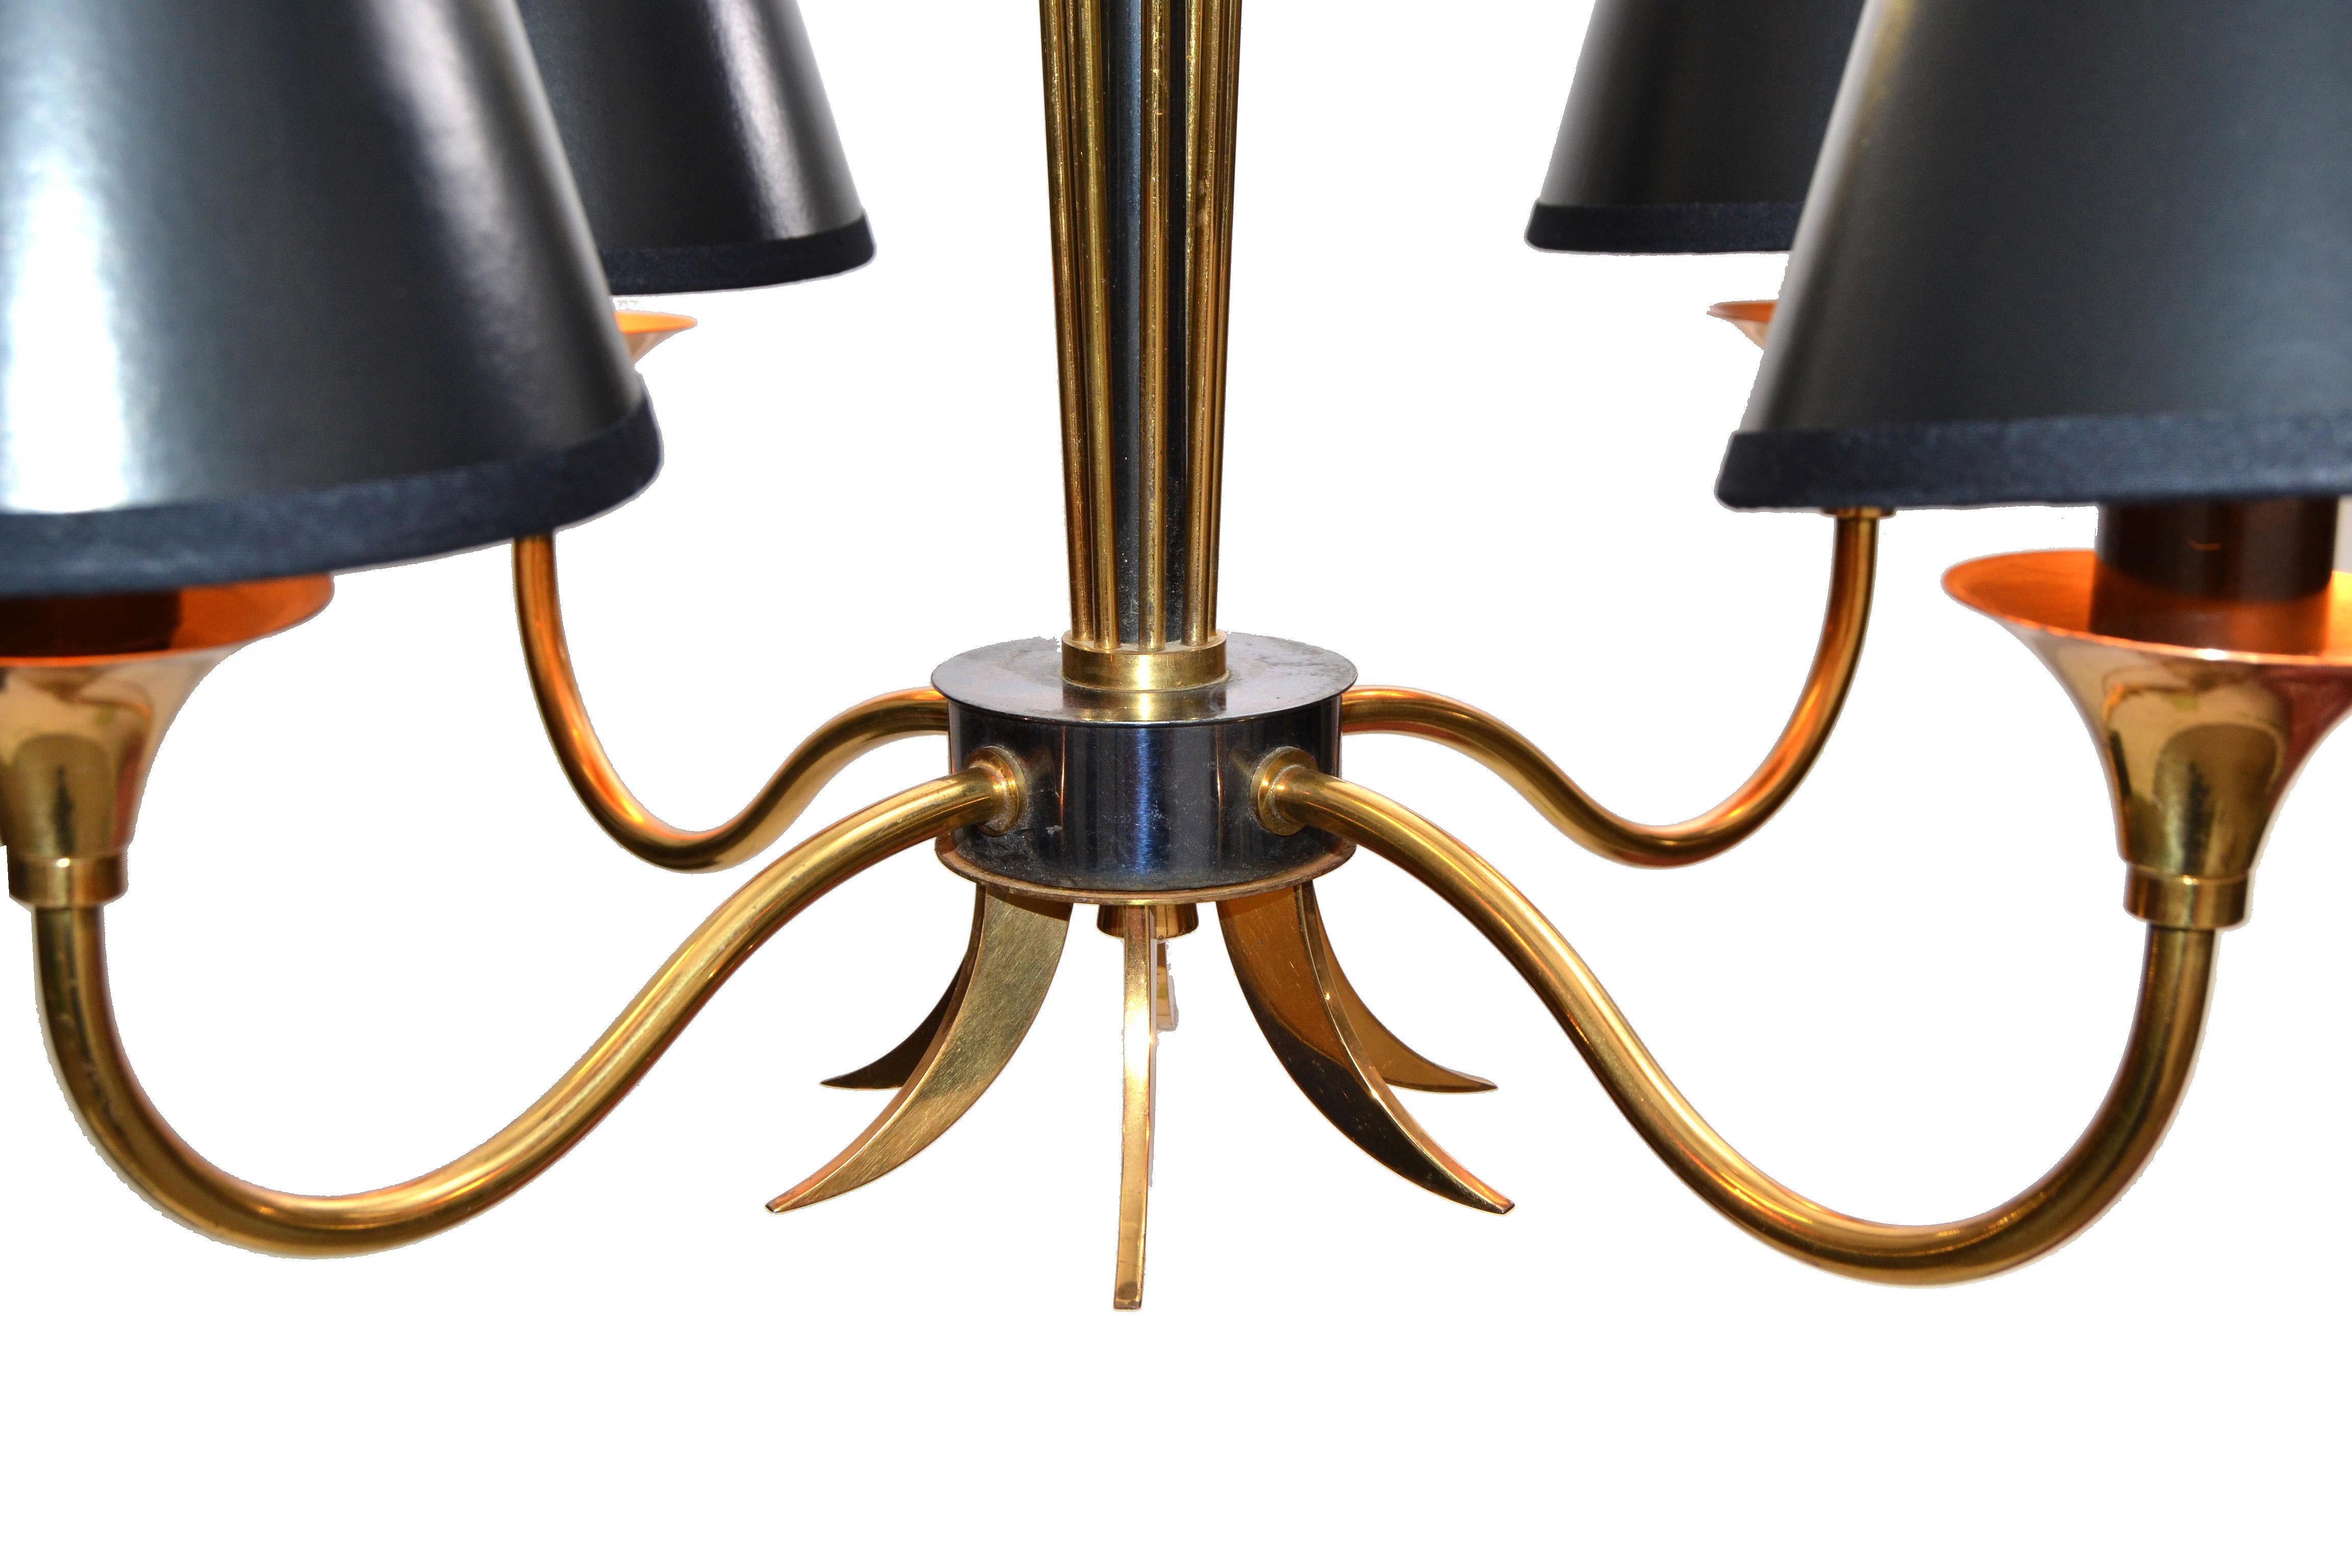 Mid-20th Century Maison Lunel Four-Light Chandelier Brass and Gun Metal French Mid-Century Modern